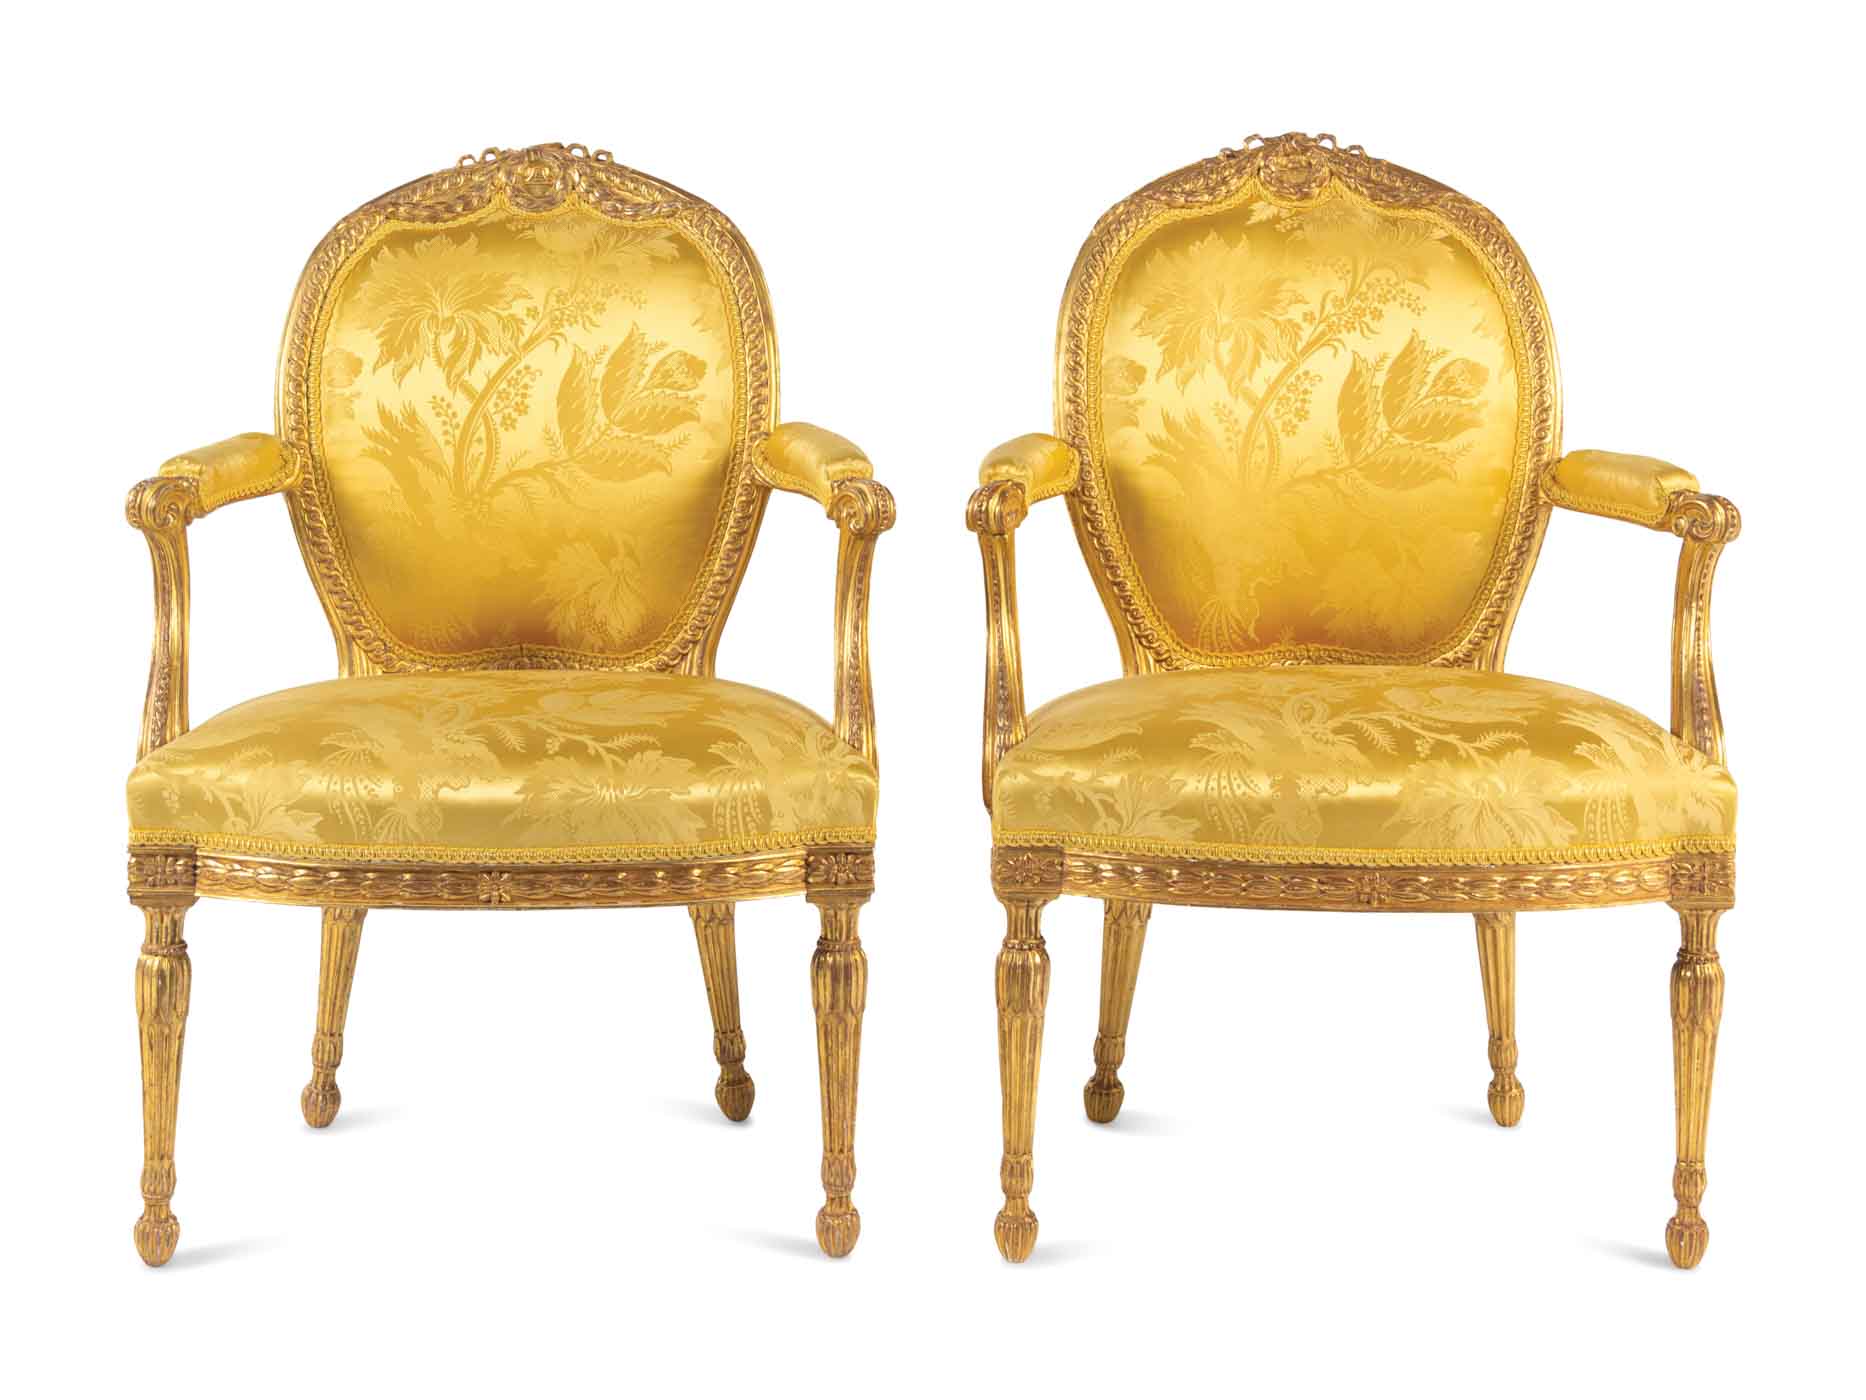 52 Lot 57 A Pair Of George Iii Carved Giltwood Open Armchairs Attributed To Thomas Chippendale